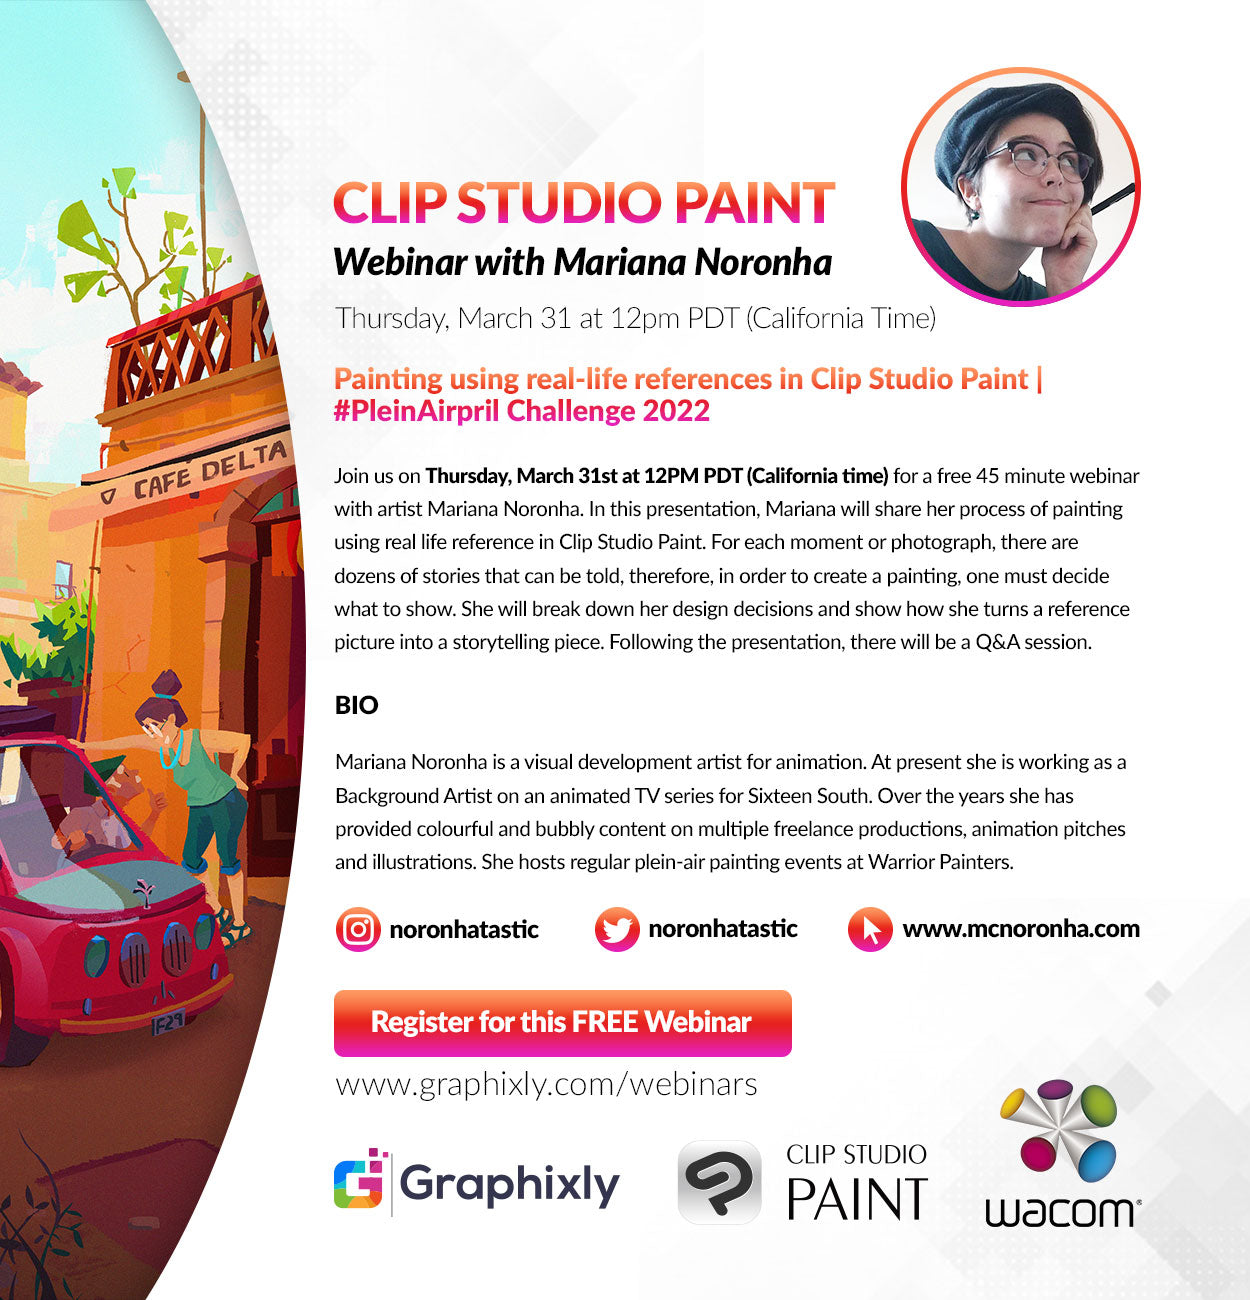 Webinar – Painting using real-life references in Clip Studio Paint | #PleinAirpril Challenge 2022 with Mariana Noronha